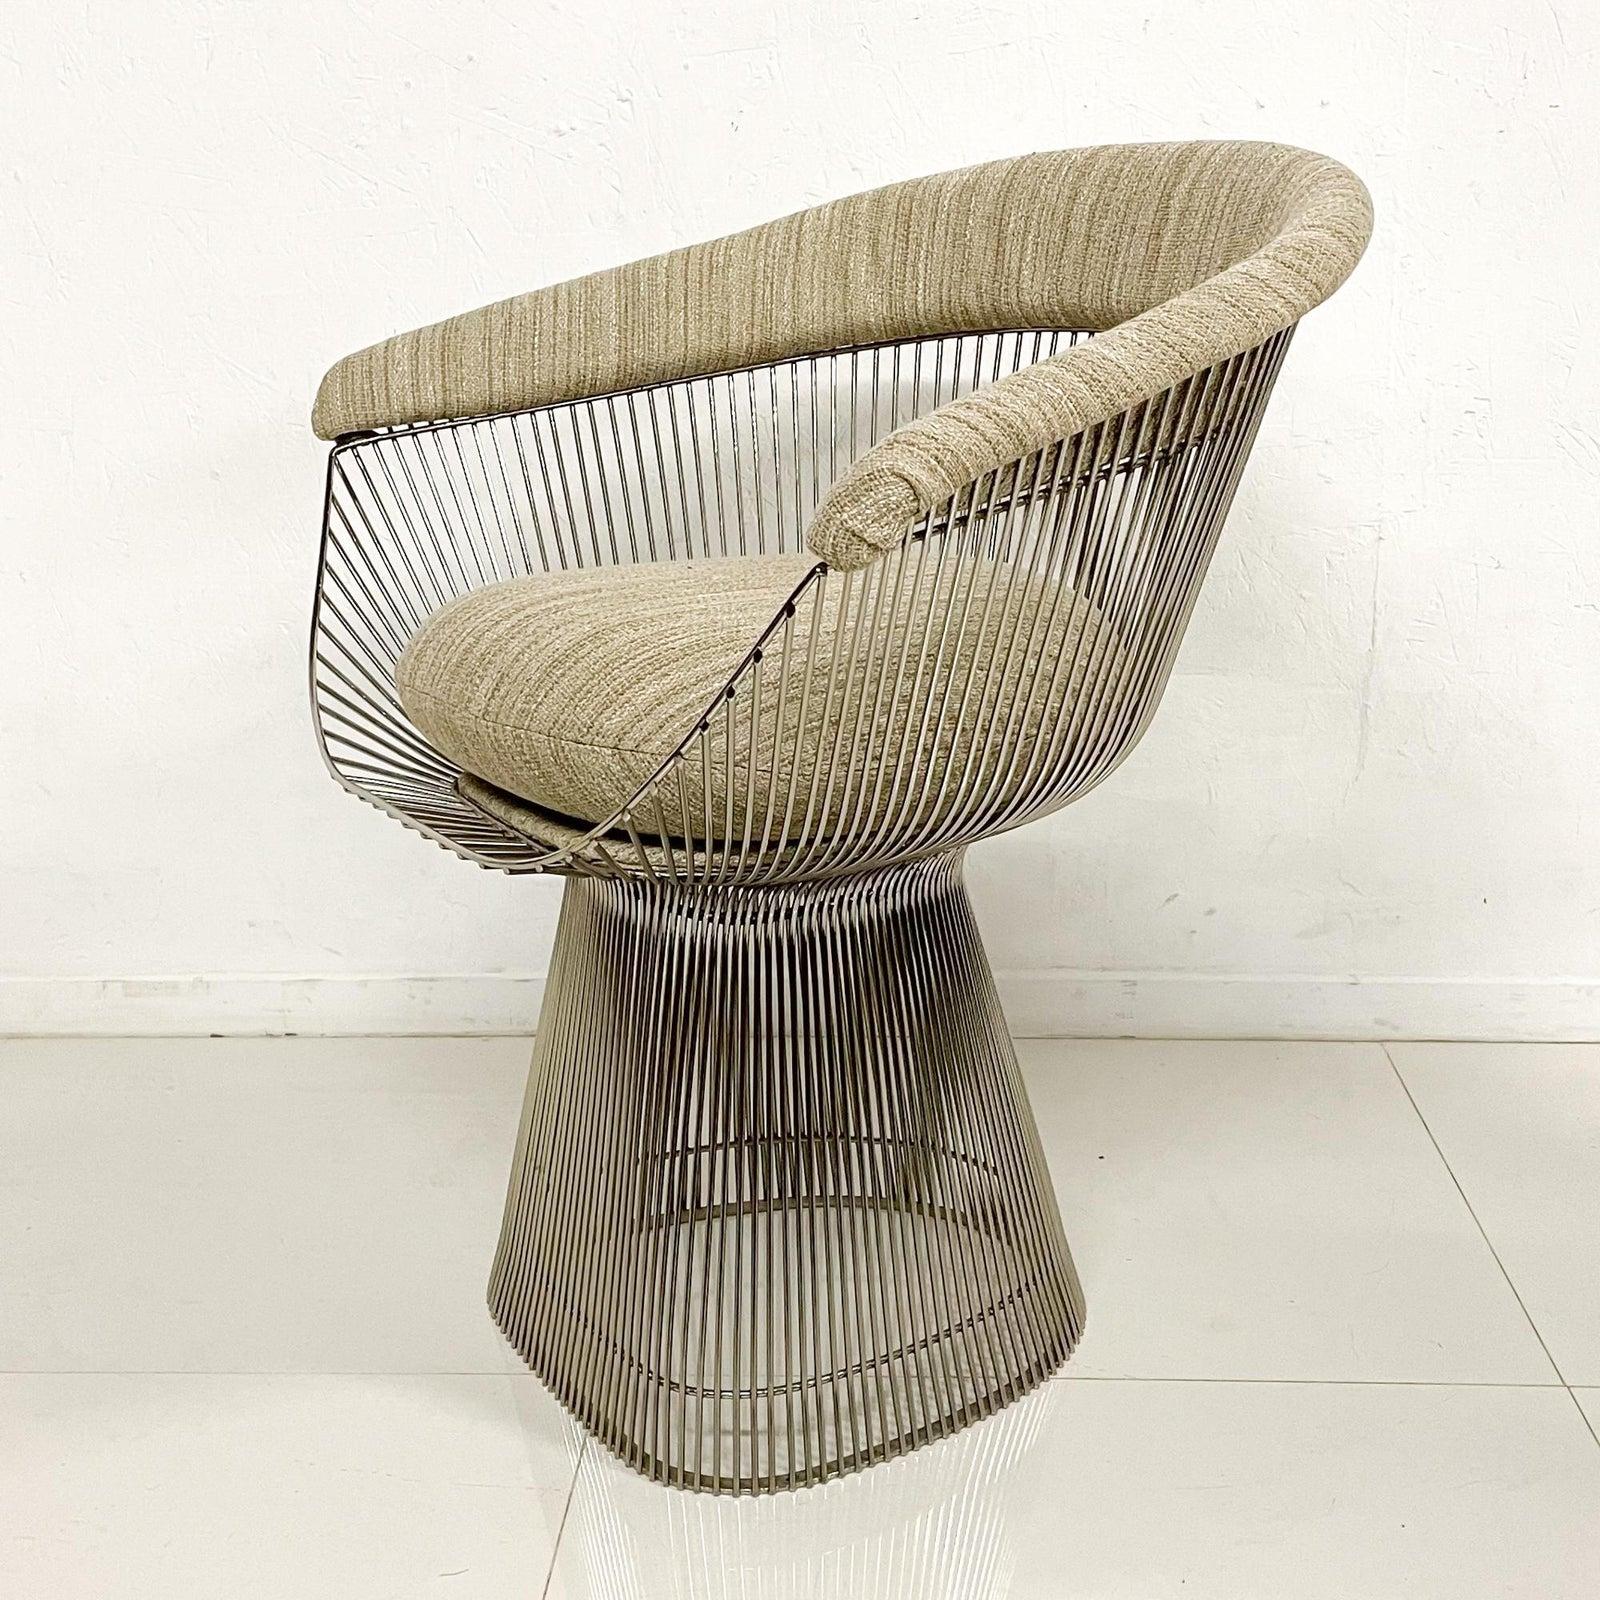 Warren platner sculptural curved wire dining chairs for Knoll, Mid-Century Modern, 1960s, USA.
For your consideration a fabulous set of four dining chairs designed by Warren Platner for Knoll. 
Graceful modern presentation with sumptuous